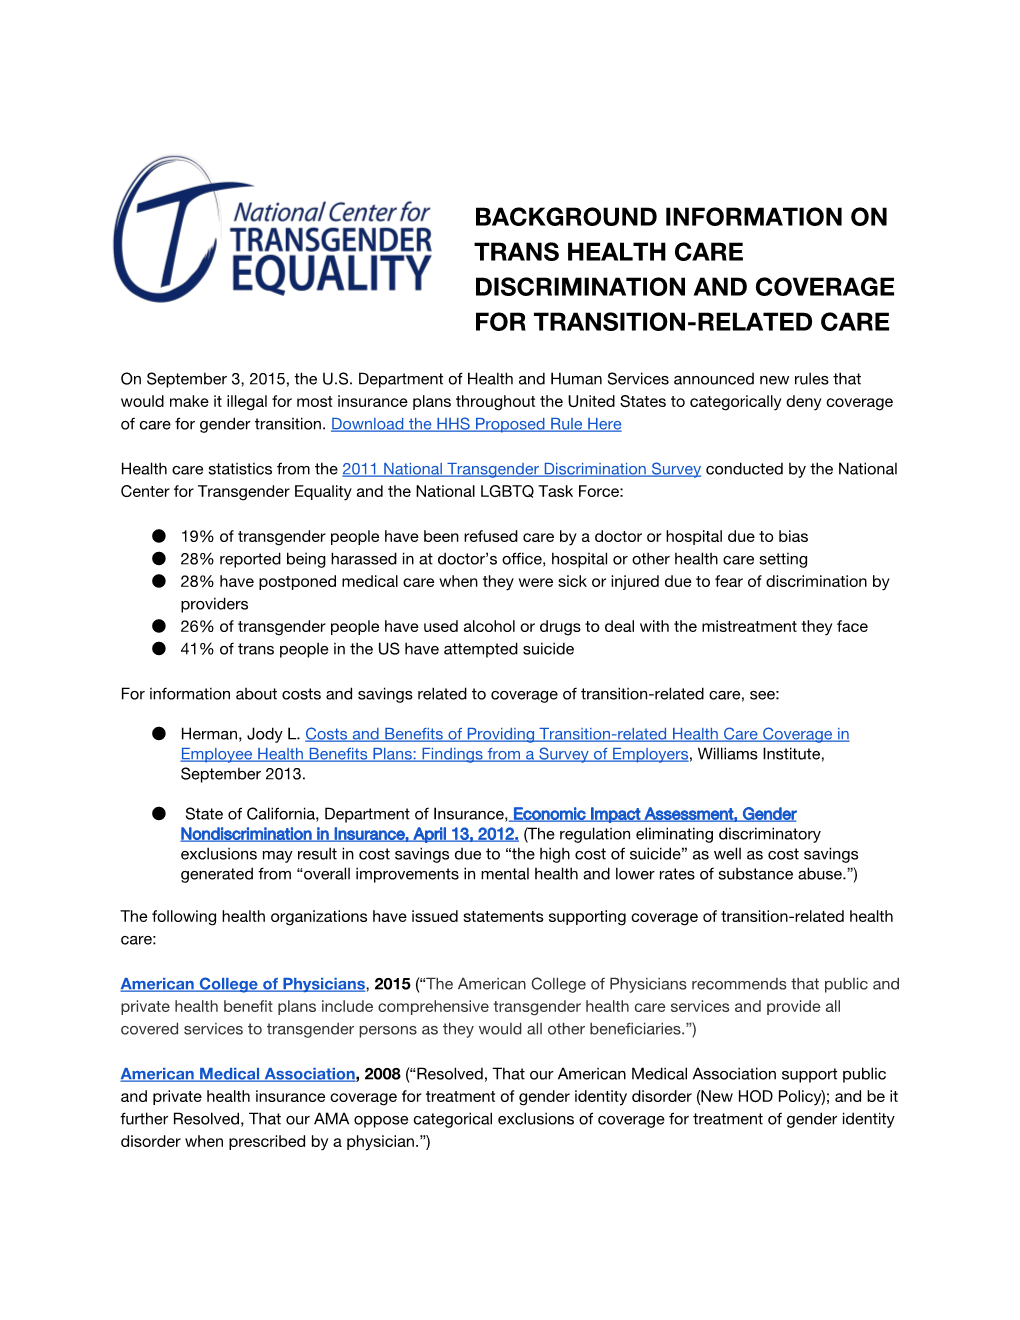 Background Information on Trans Health Care Discrimination and Coverage for Transition-Related Care